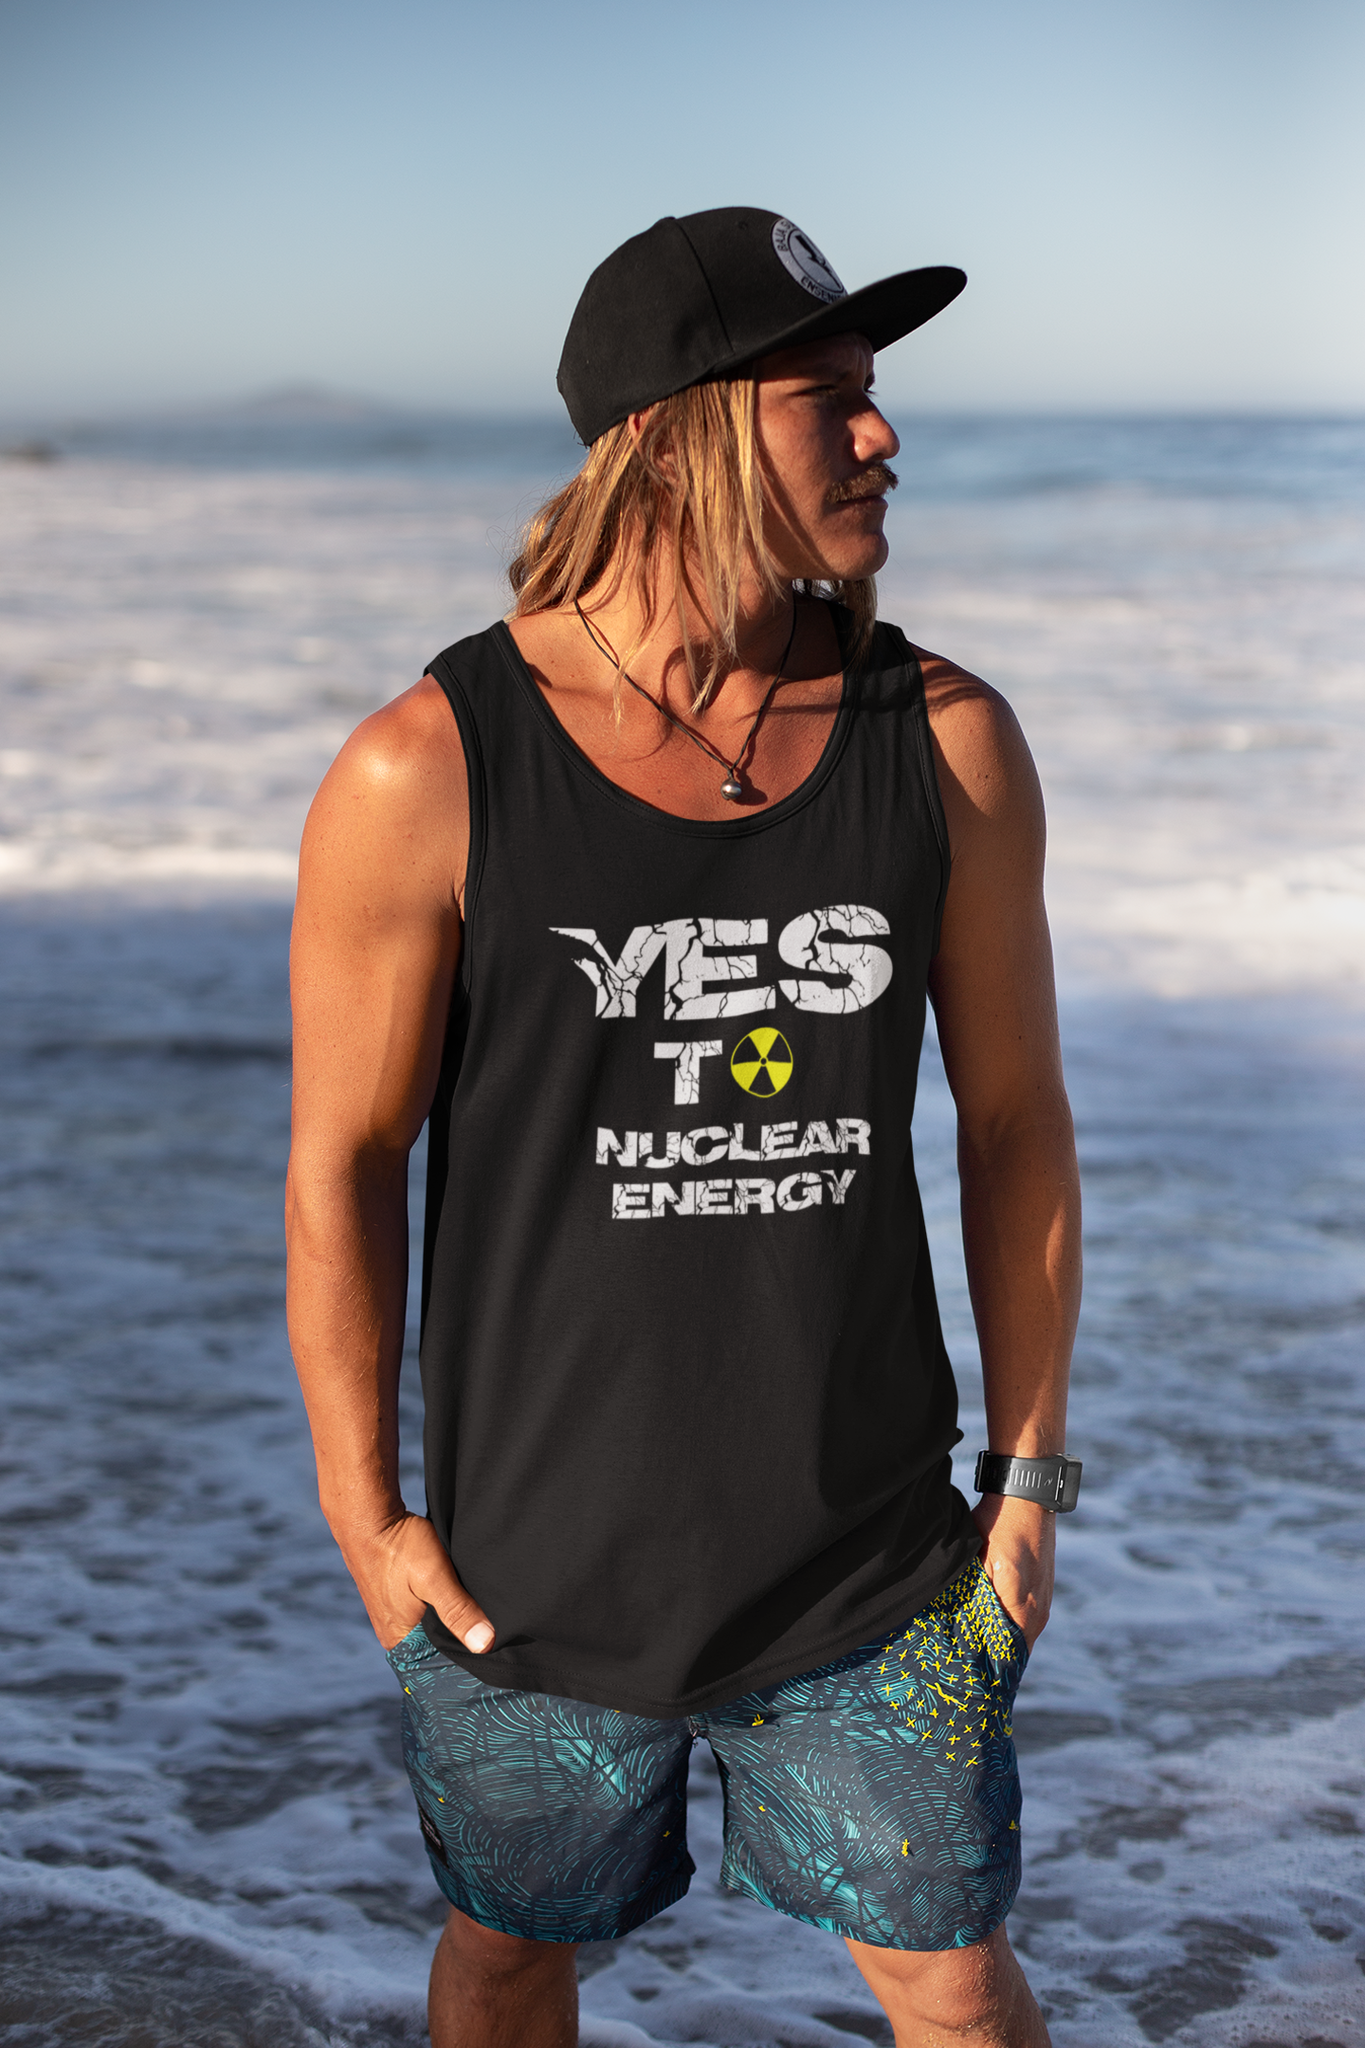 Yes To Nuclear Energy Tank Top Men